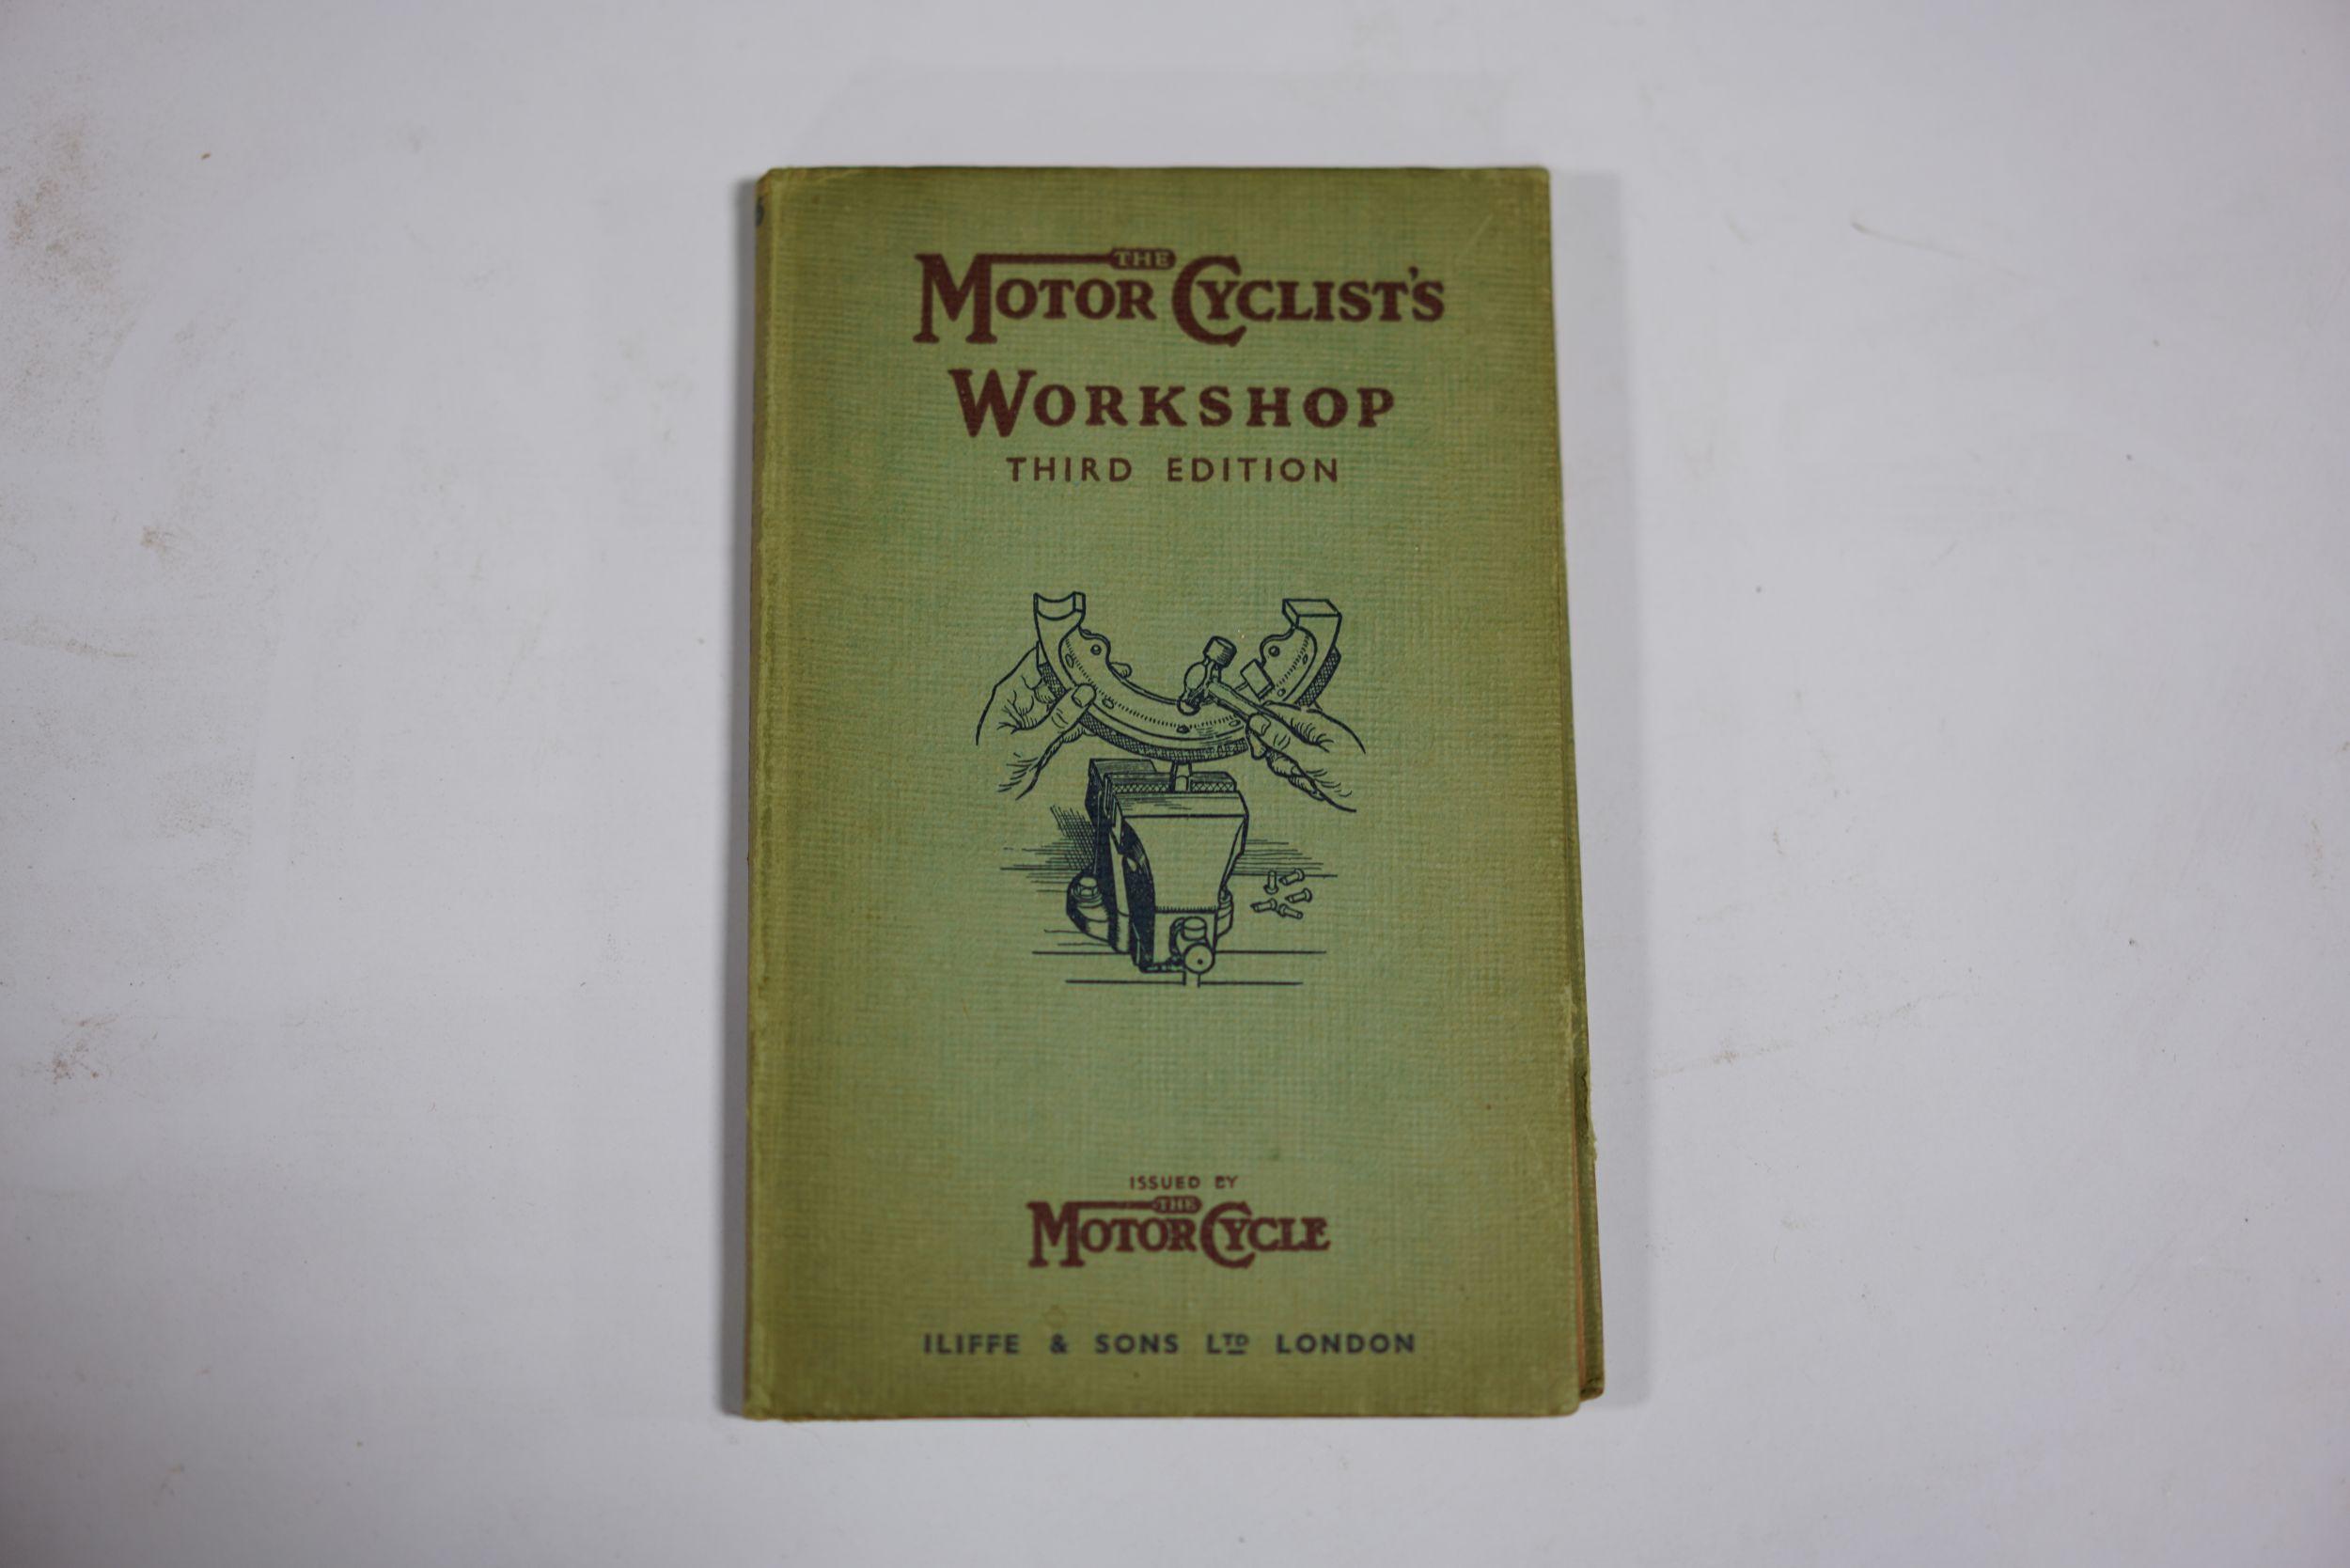 Vintage Motorcycle manuals/books